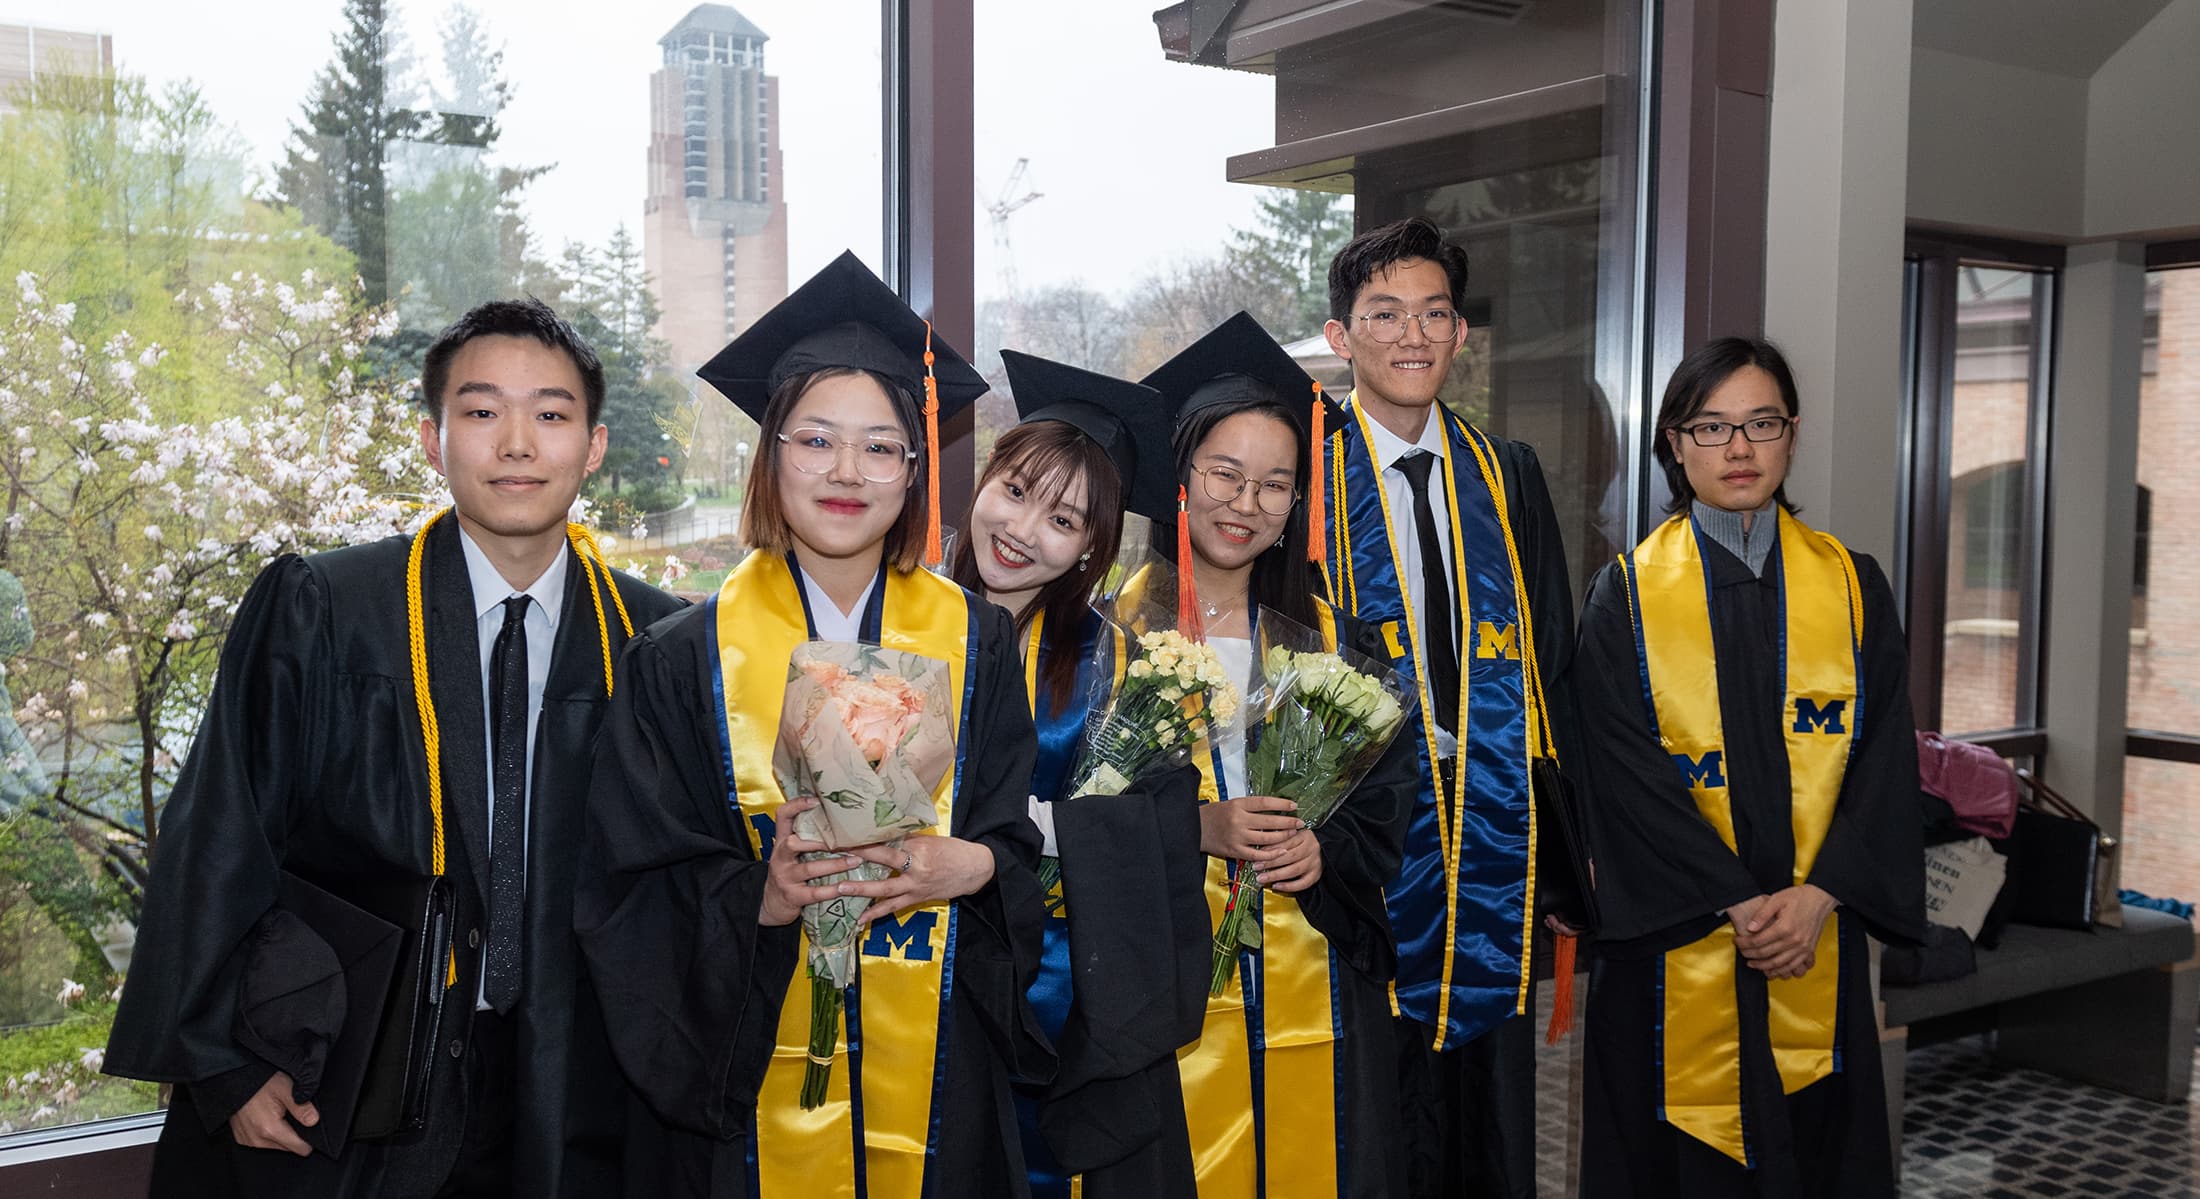 Students in graduate gowns 